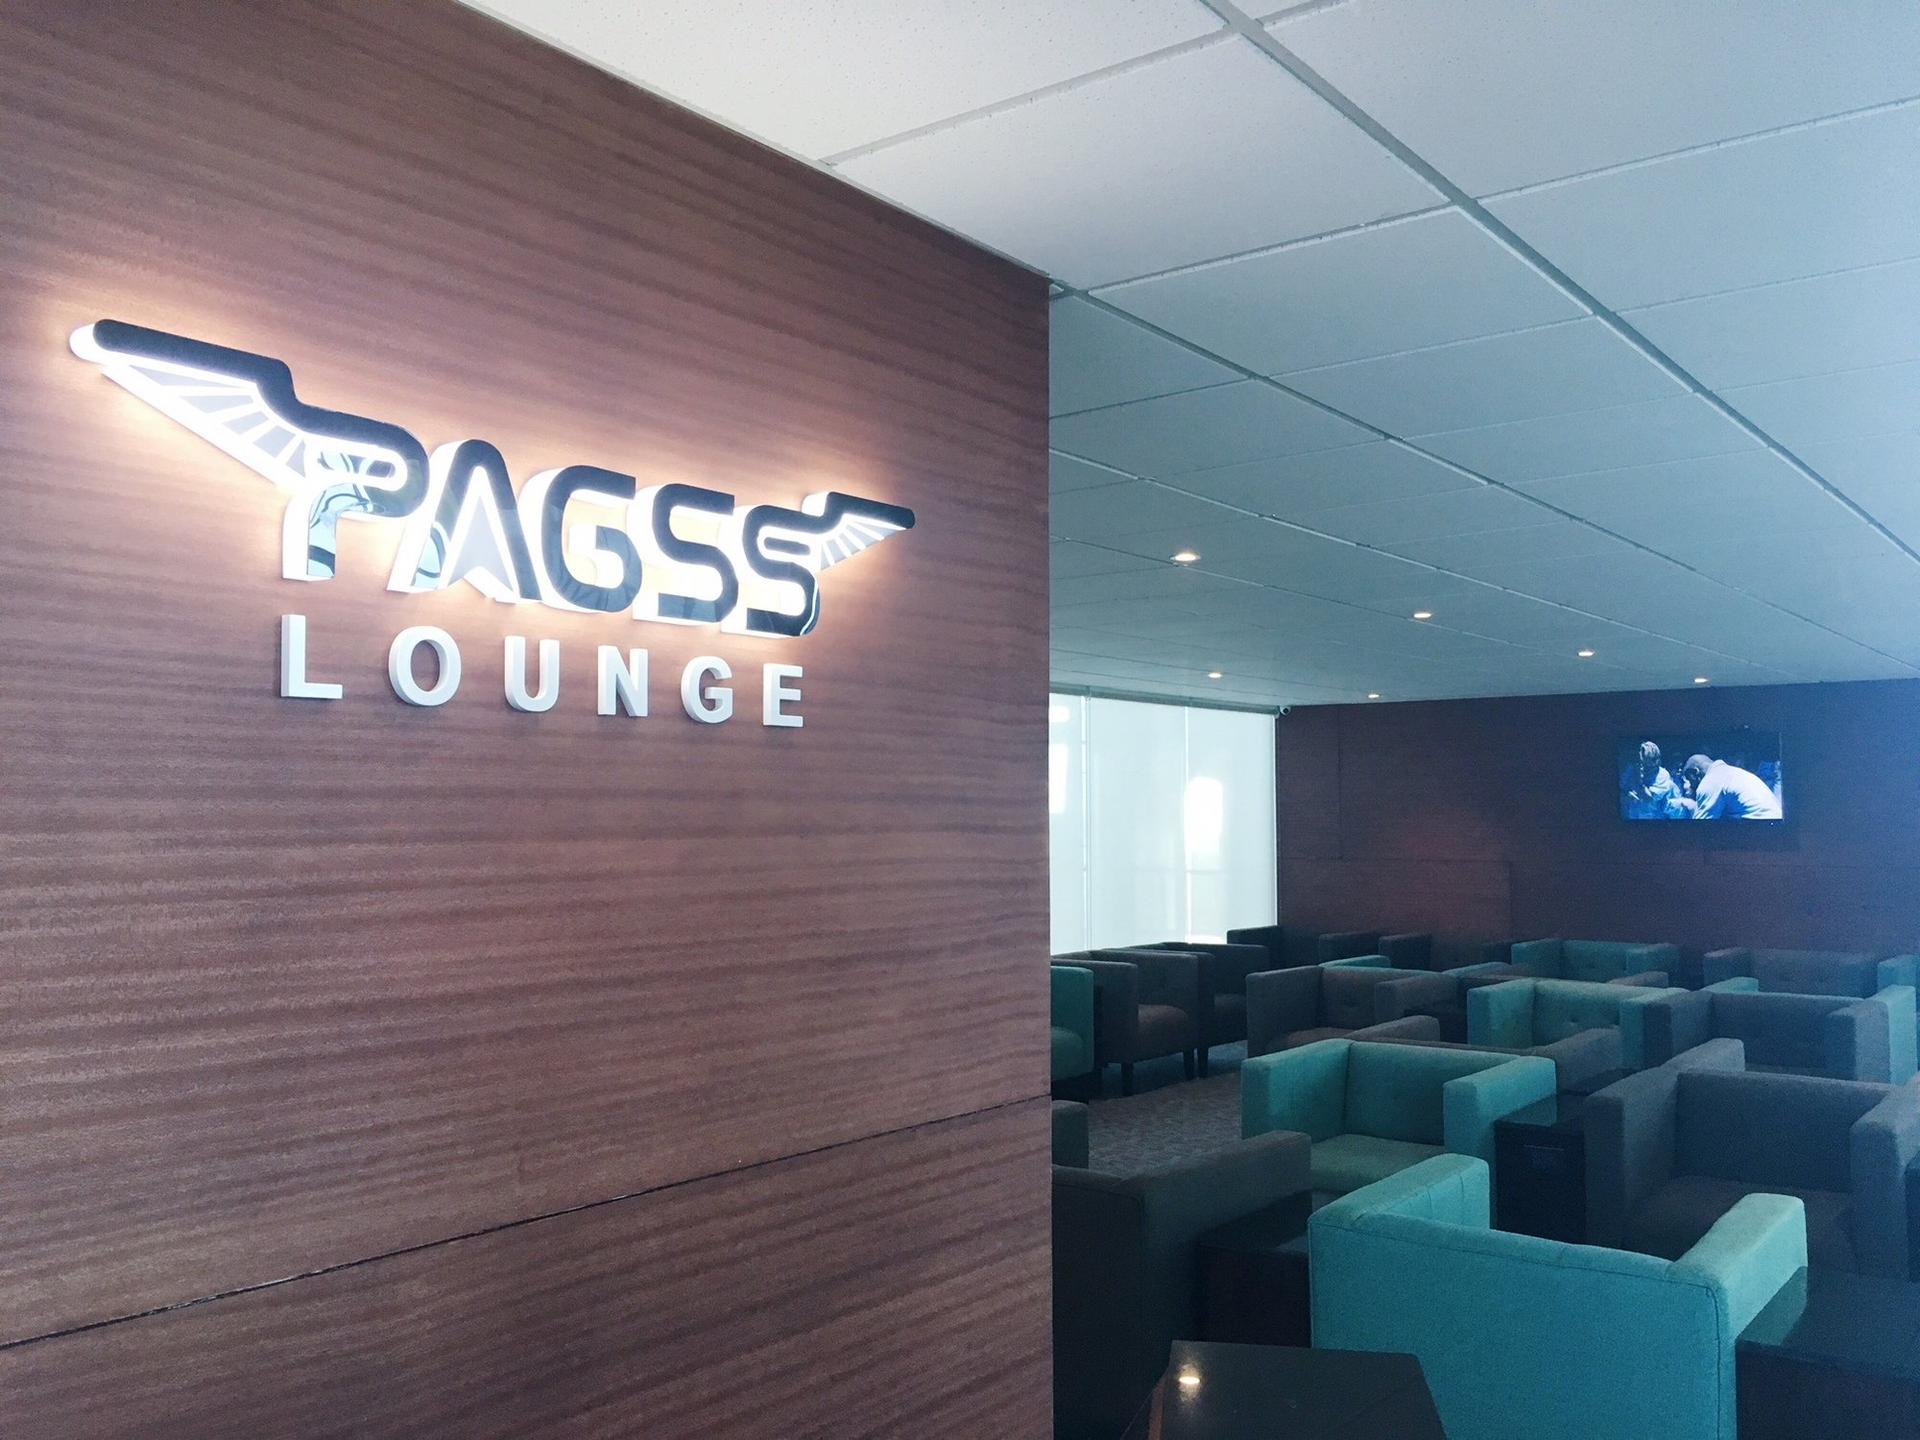 PAGSS Lounge image 4 of 5